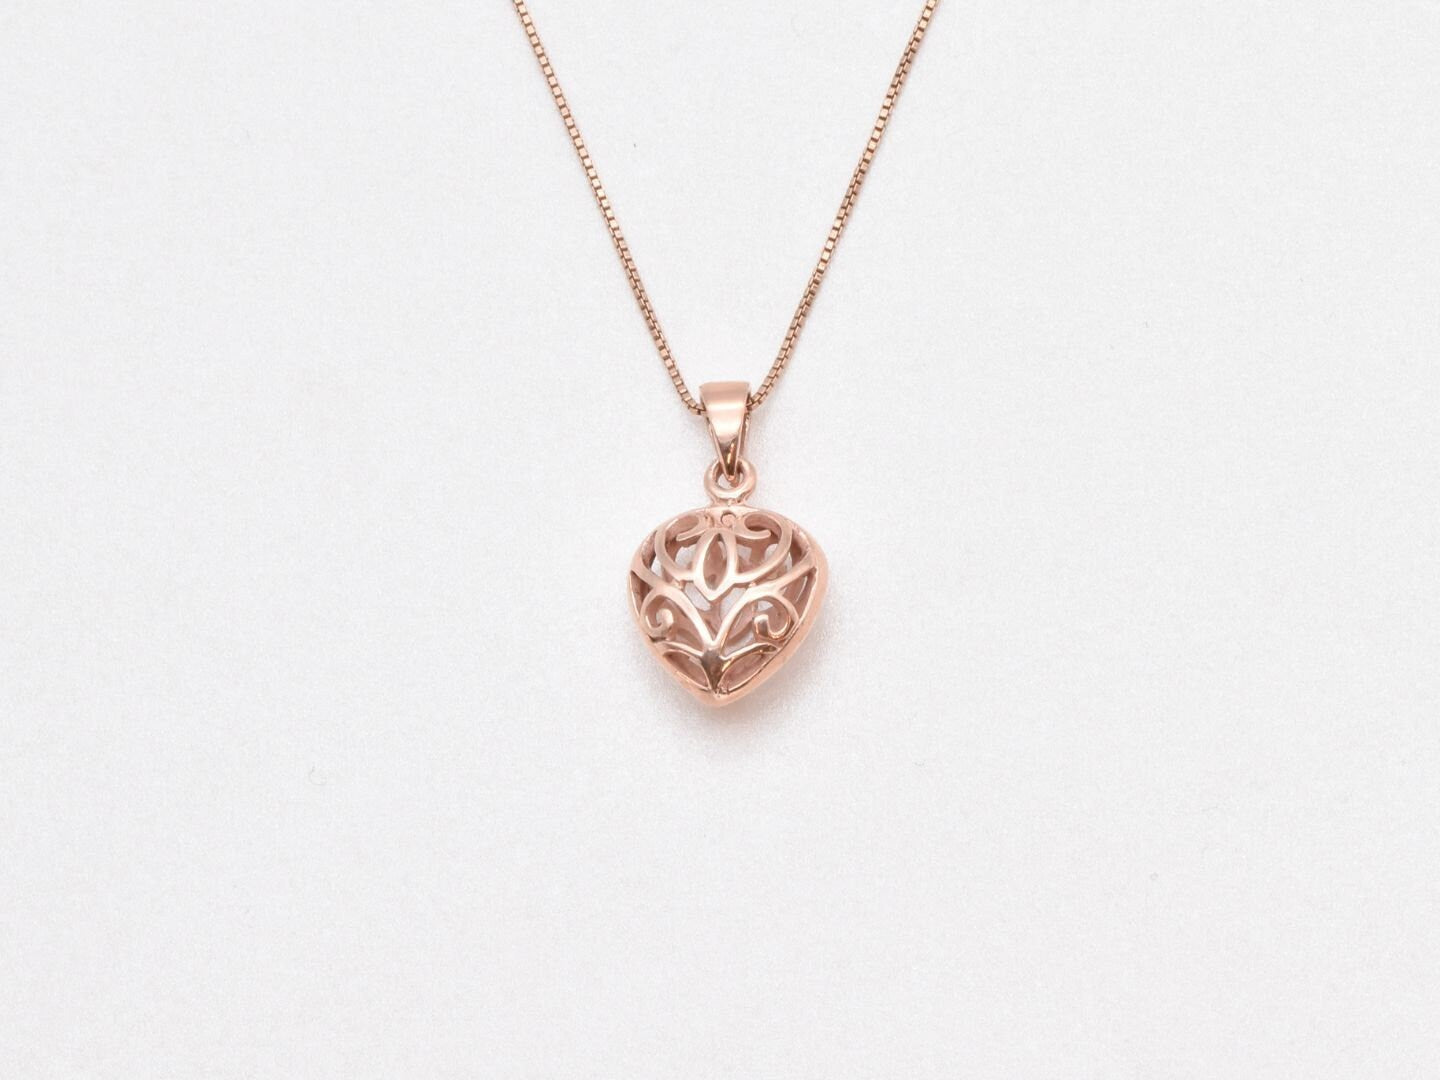 Rose Gold Heart Pendant, Puffed Heart Necklace, Filigree Heart Necklace